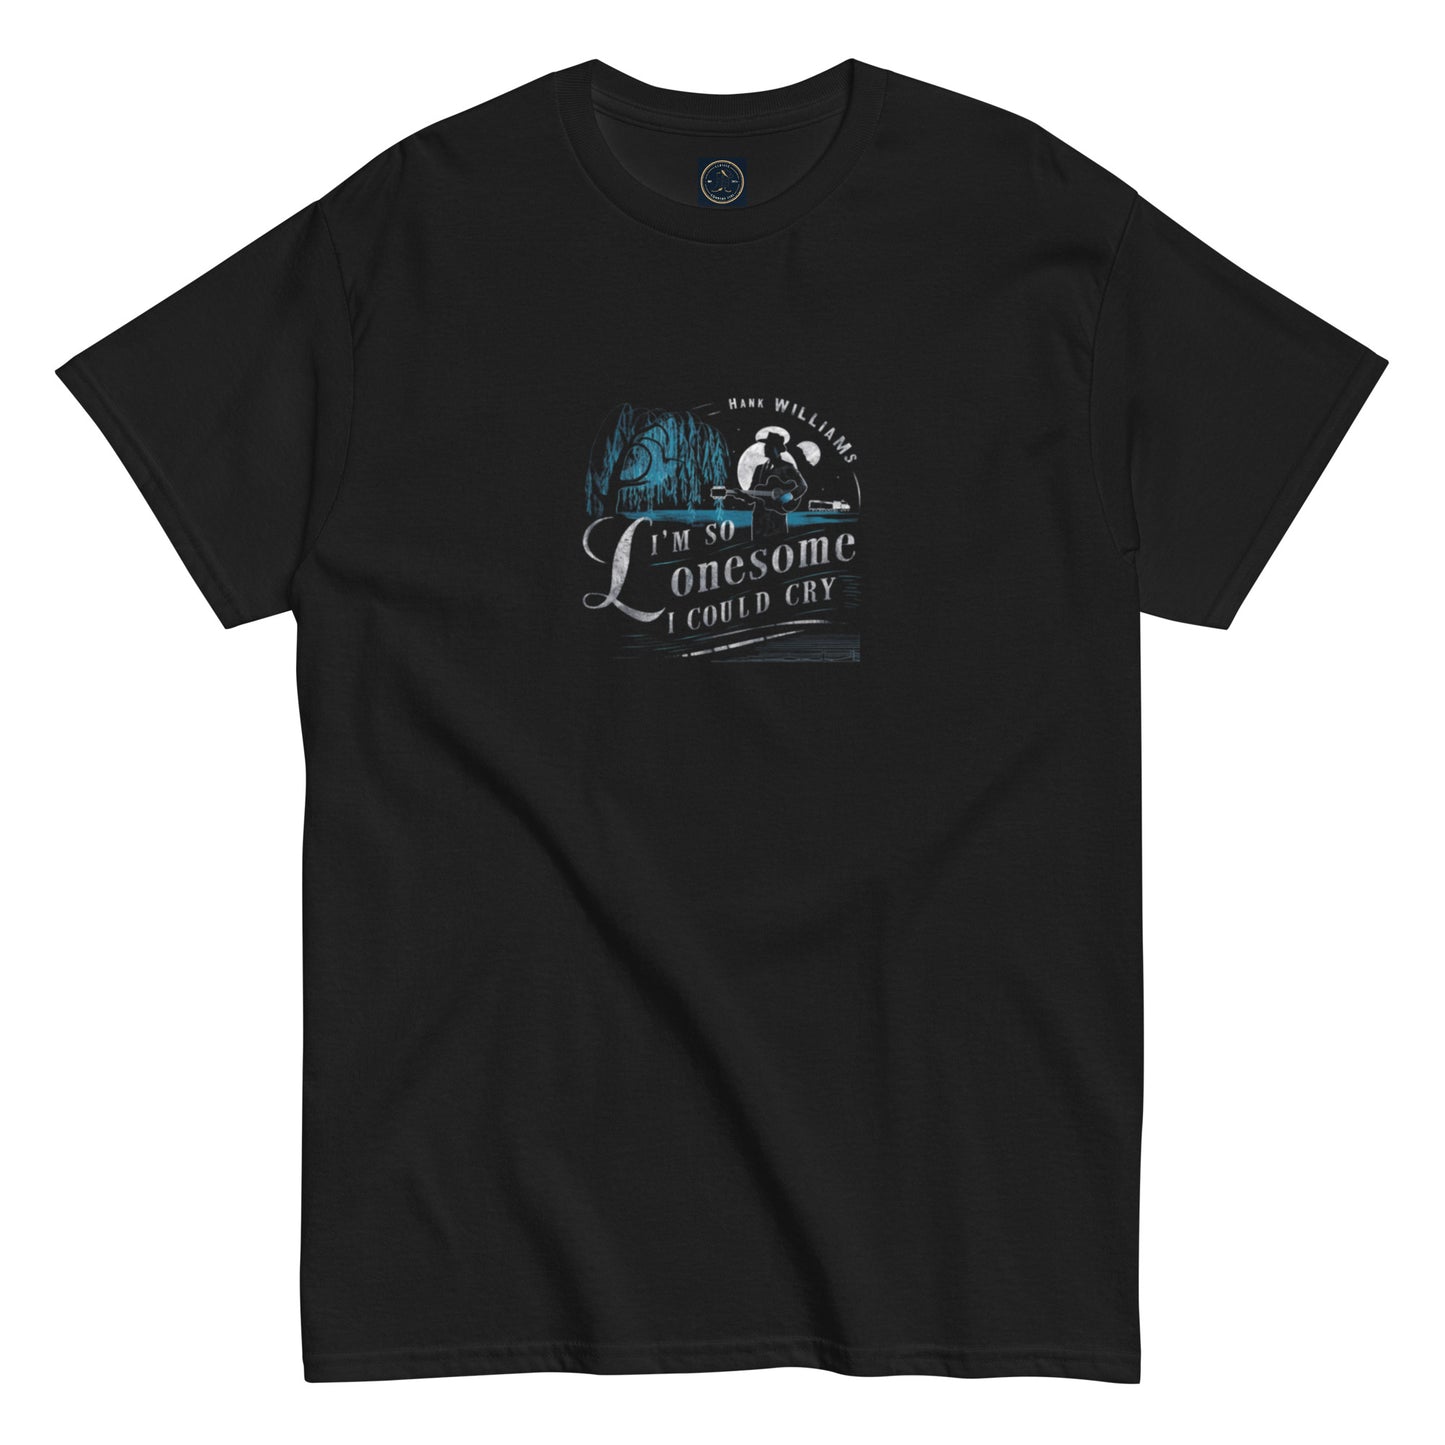 I'm So Lonesome - Inspired by Hank Williams | Classic Country Tees